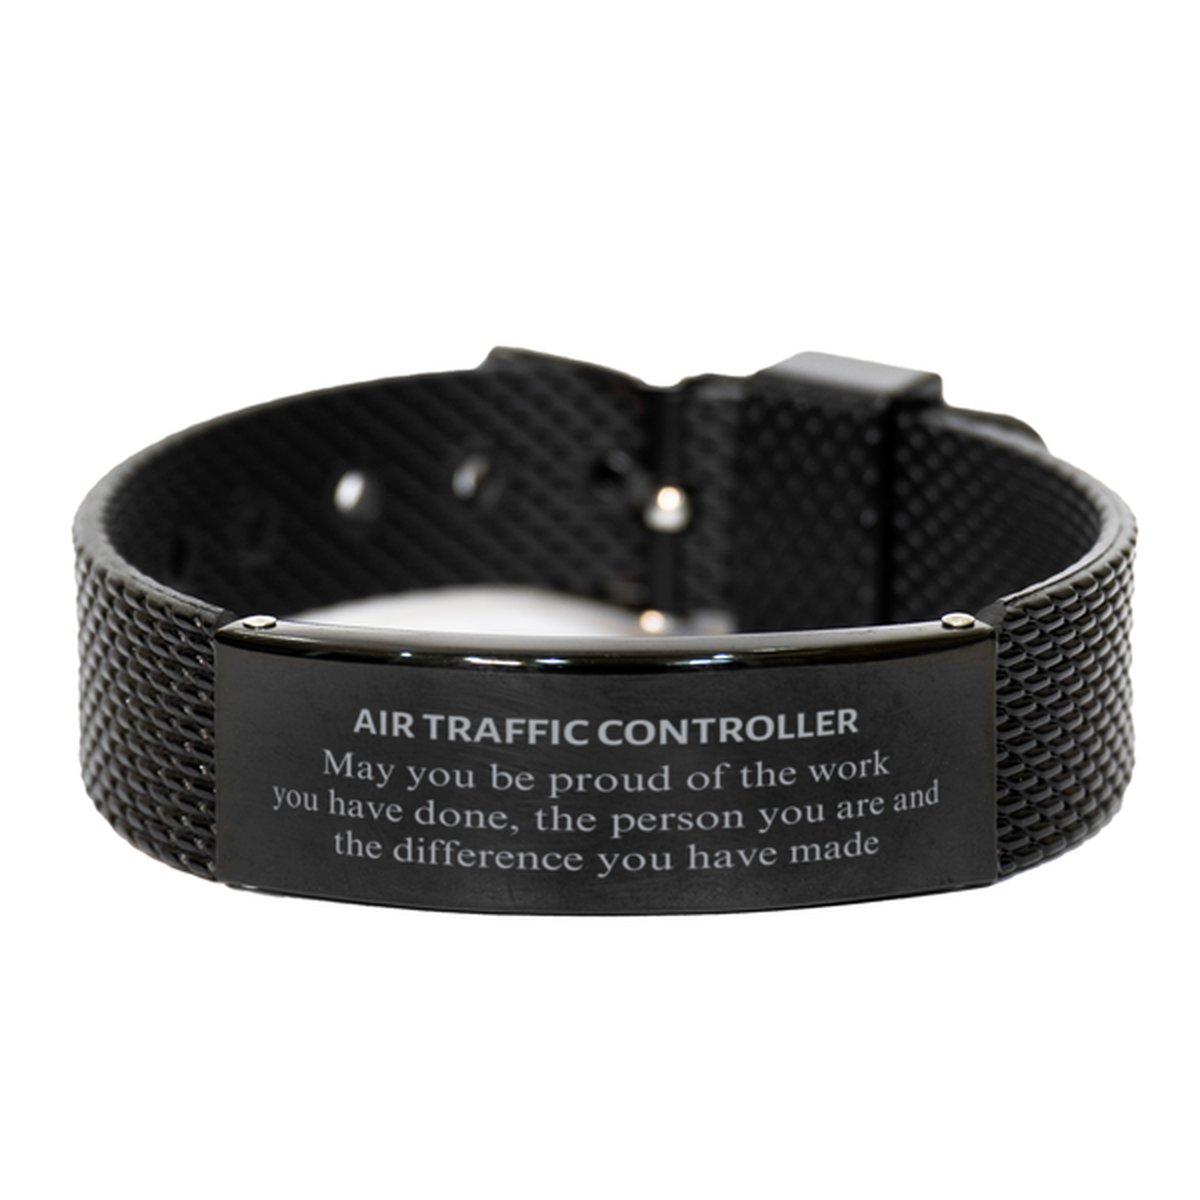 Air Traffic Controller May you be proud of the work you have done, Retirement Air Traffic Controller Black Shark Mesh Bracelet for Colleague Appreciation Gifts Amazing for Air Traffic Controller